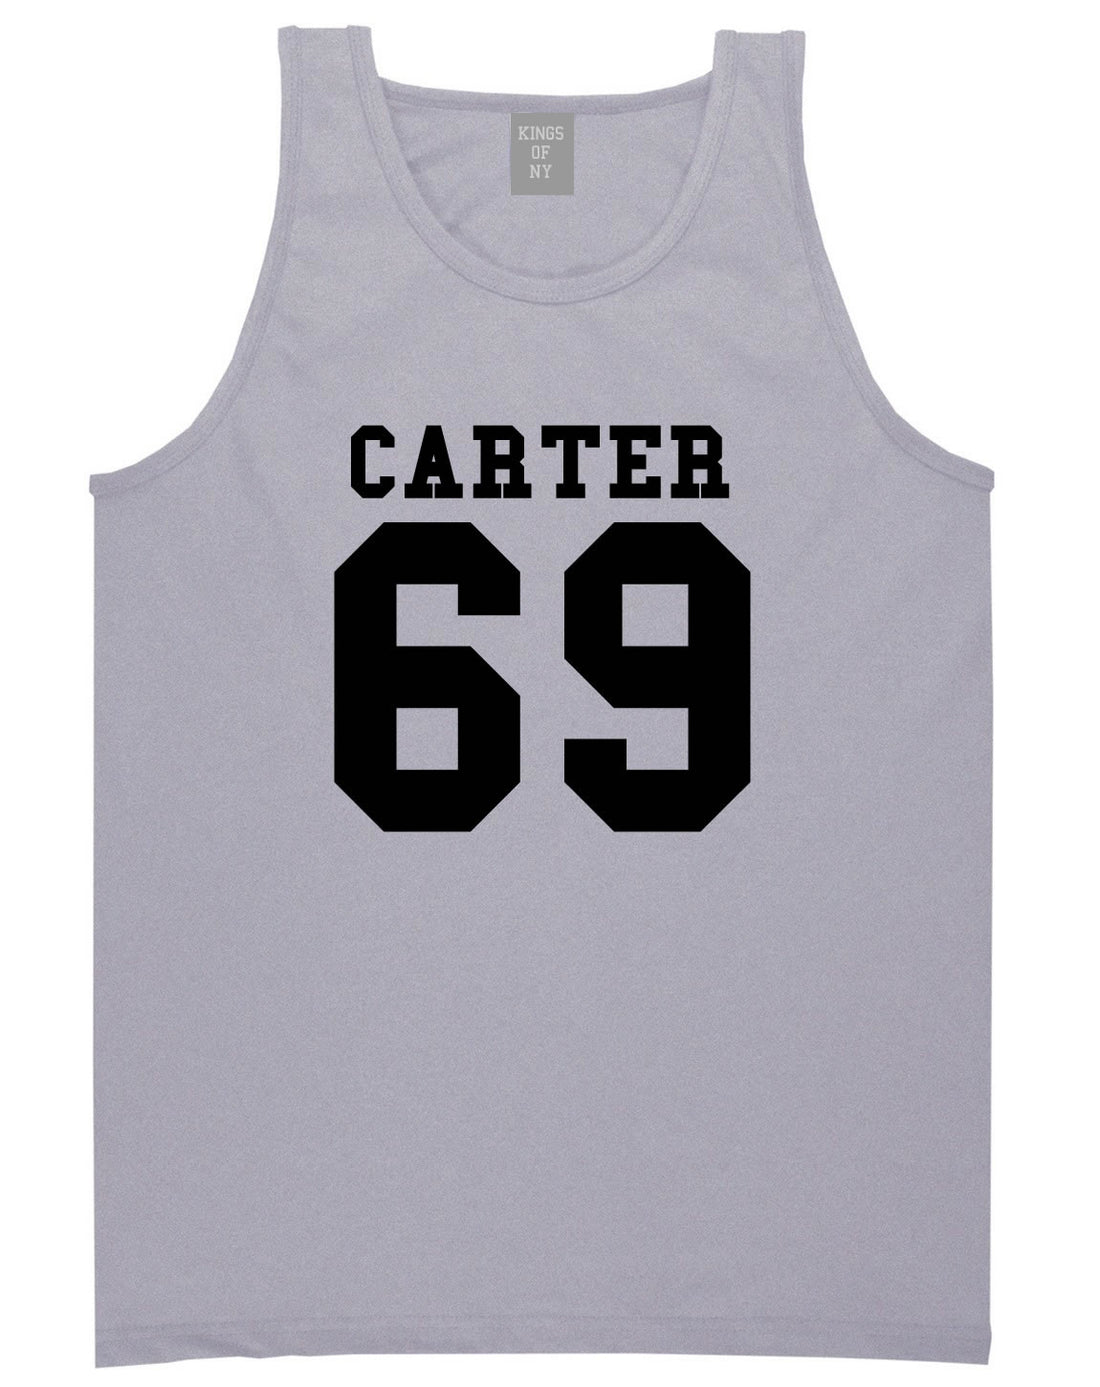  Carter 69 Team Tank Top in Grey by Kings Of NY